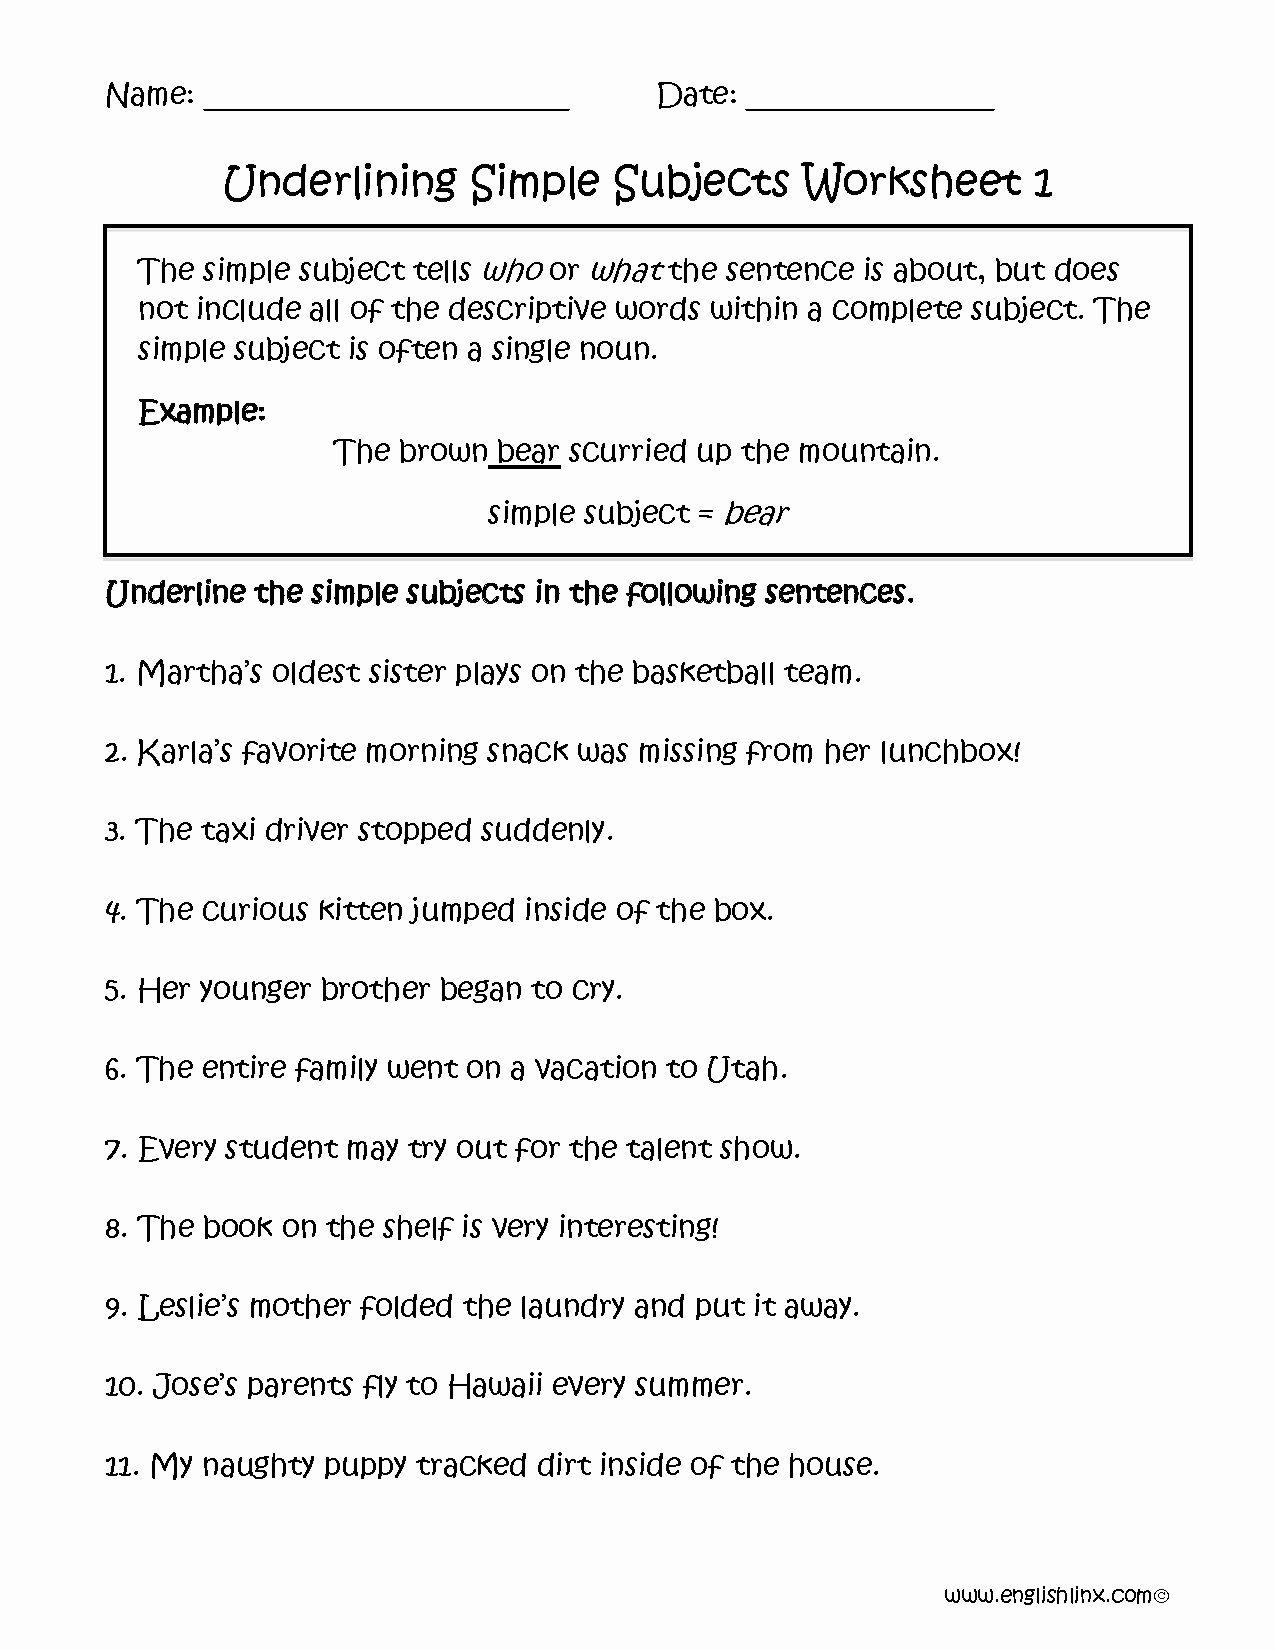 Subjects and Predicates Worksheet Best Of Underlining Simple Subject Worksheet